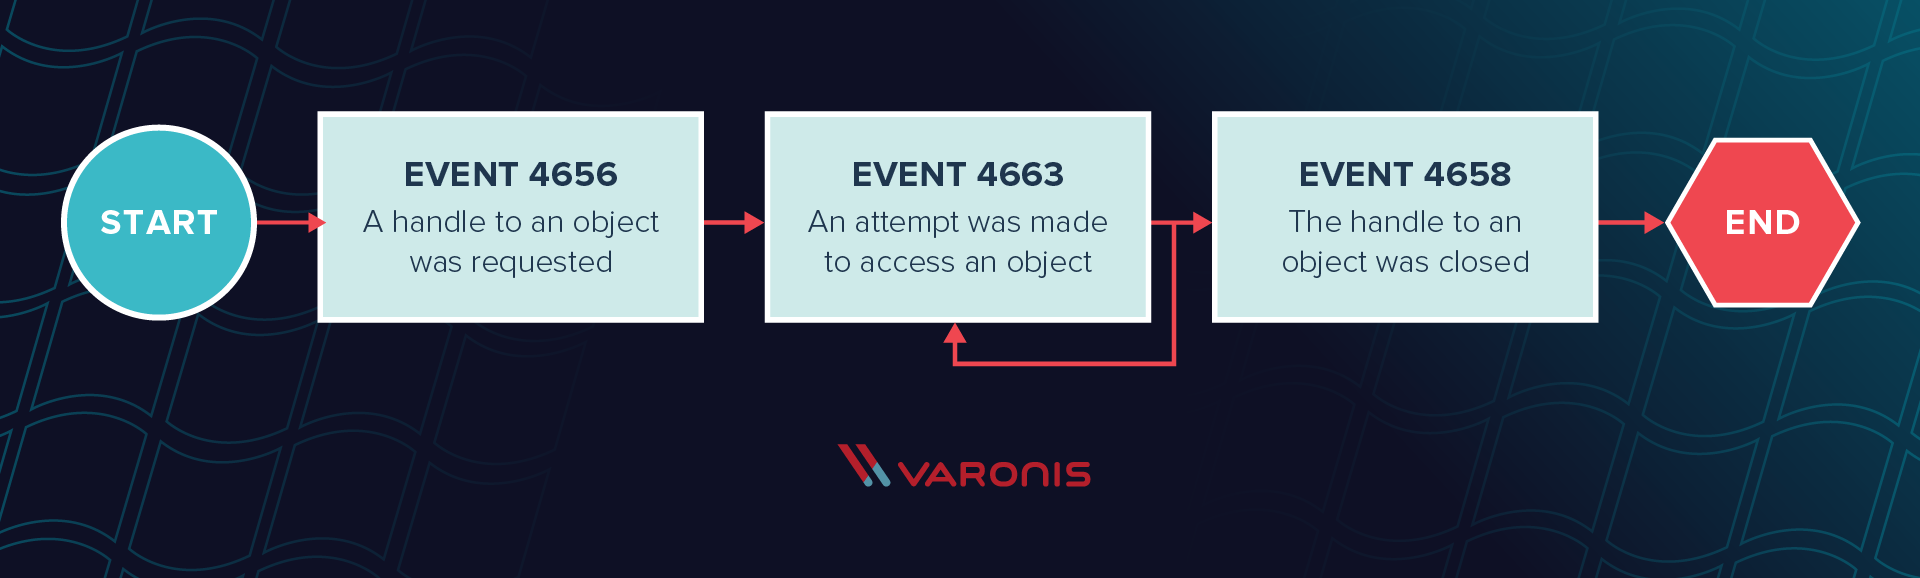 flowchart illustration with text that says: Start | Event 4656: A handle to an object was requested | Event 4663: An attempt was made to access an object | Event 4658: The handle to an object was closed | End